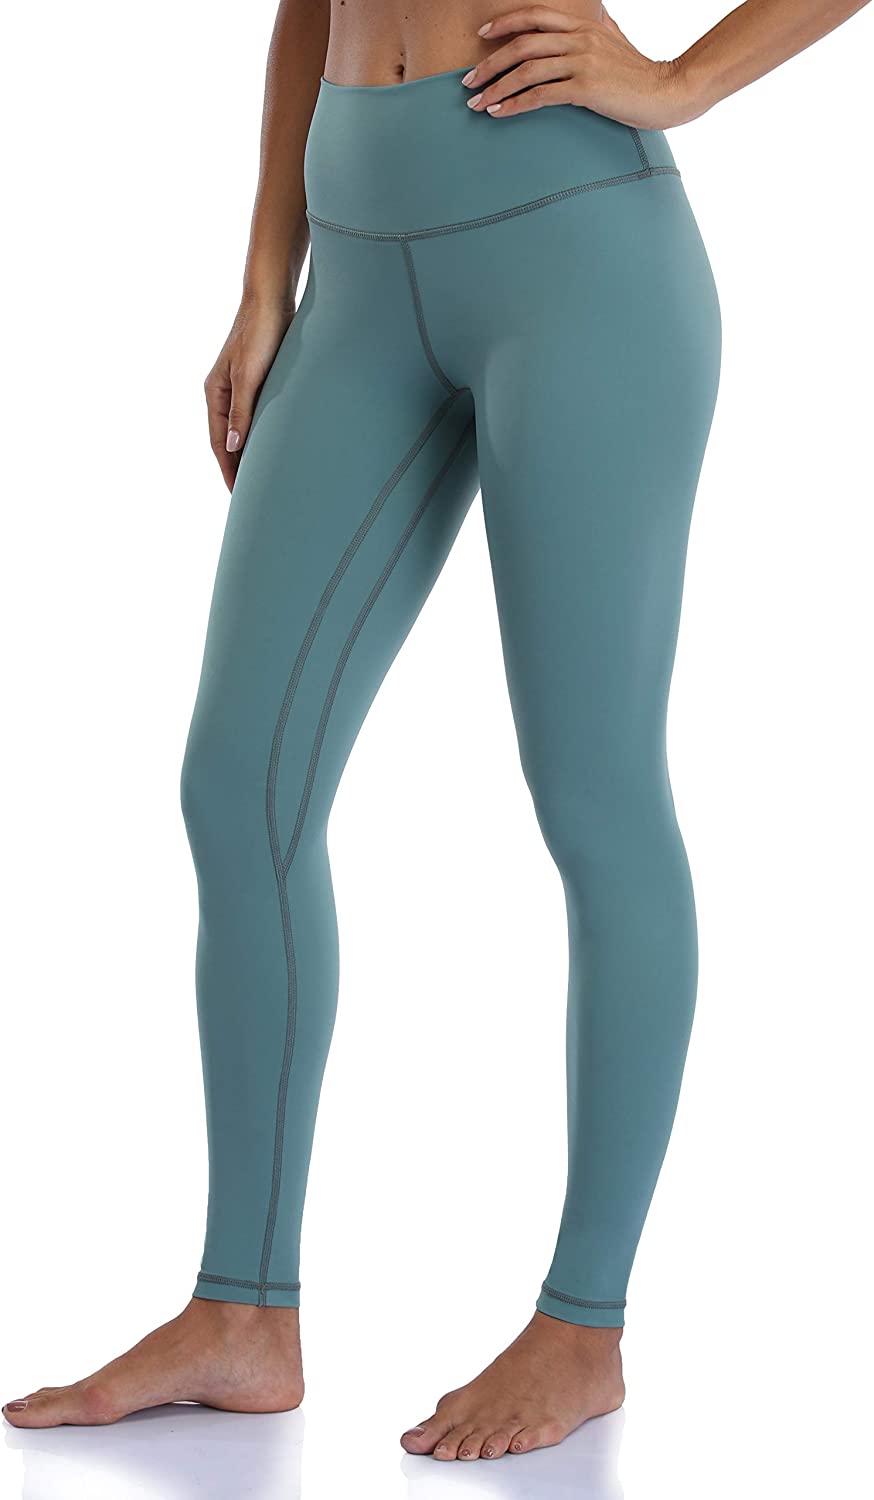 Colorfulkoala Women's Buttery Soft High Waisted Yoga Pants- REVIEW-  Seriously the softest! My favs! 